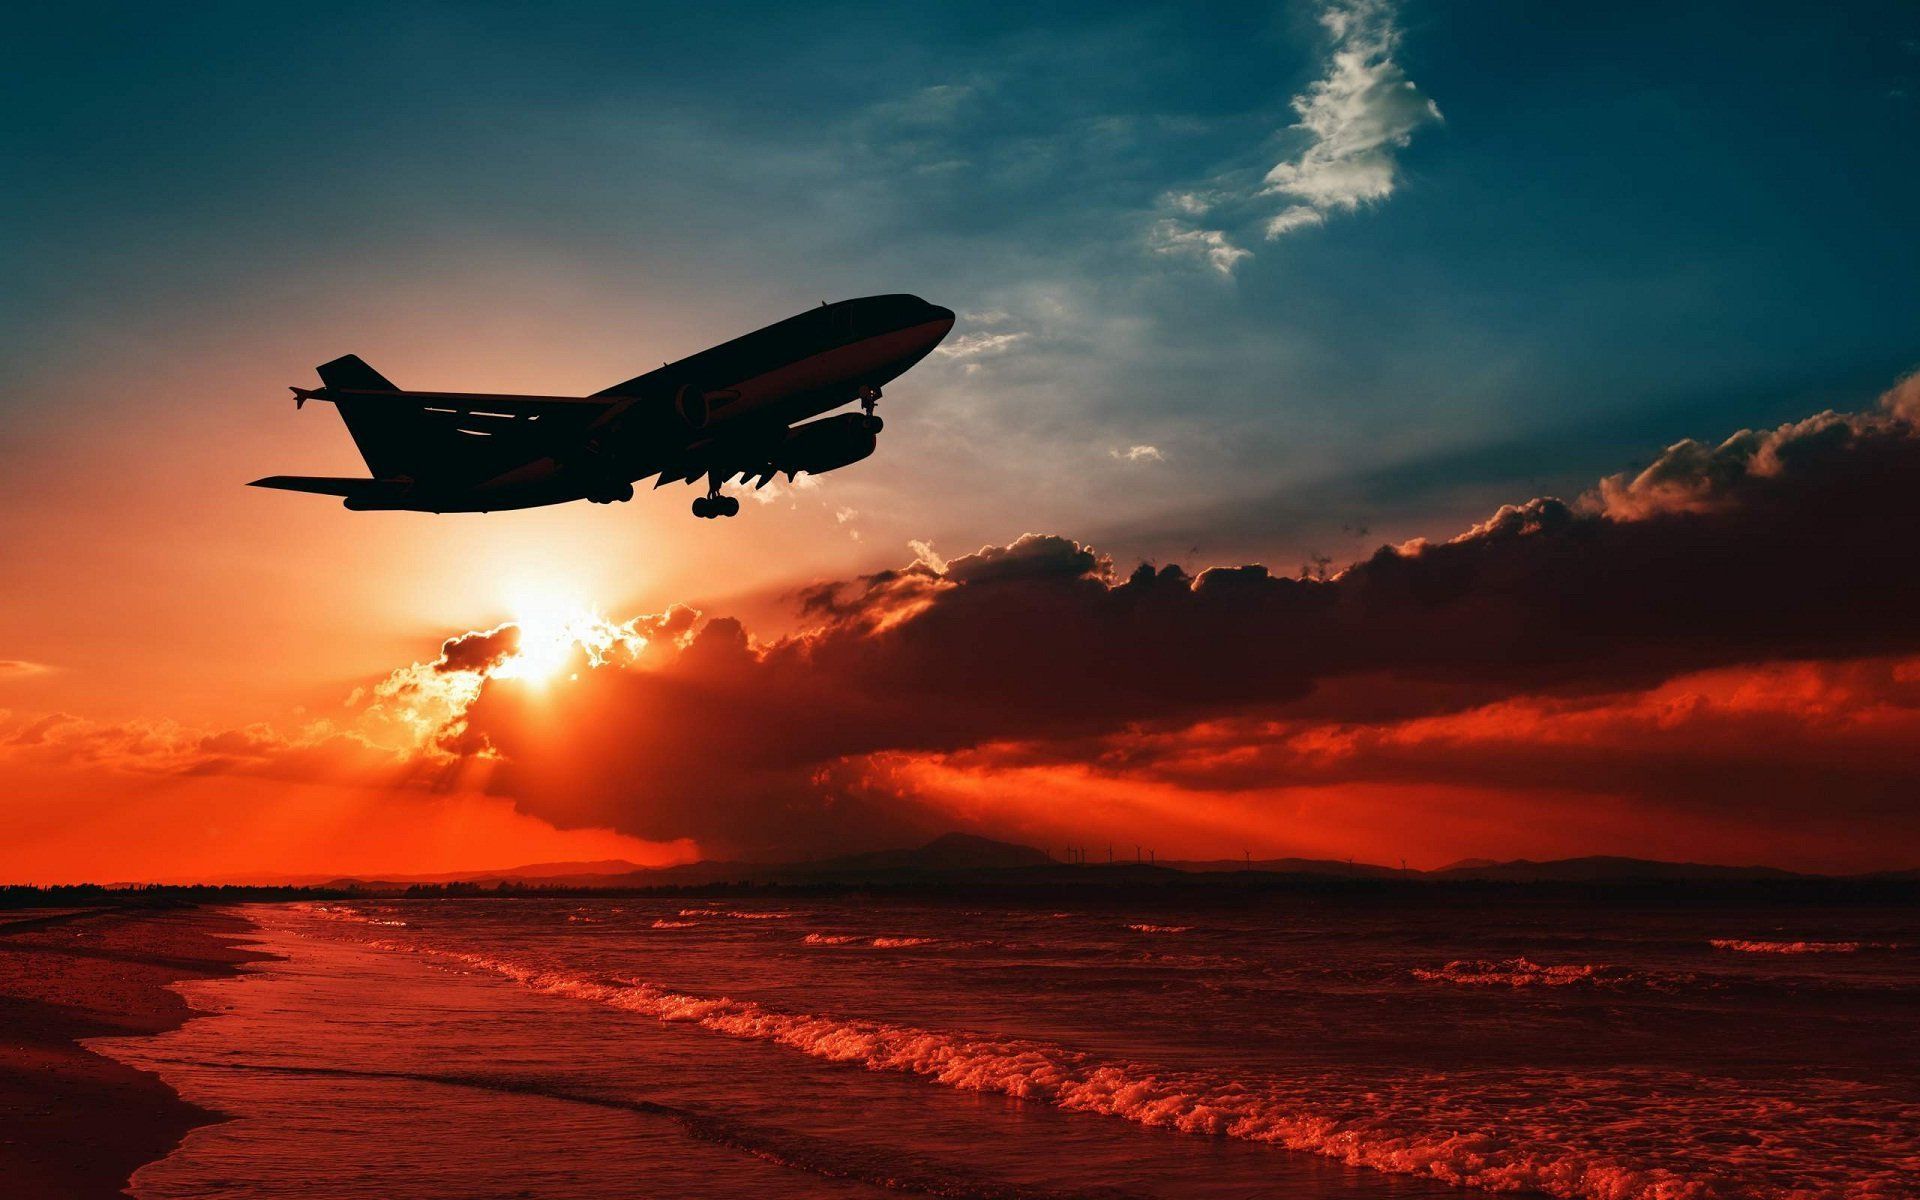 Natural Airplane Sunset And Sea Most Beautiful HD Wallpaper. Airplane wallpaper, Plane wallpaper, Aircraft